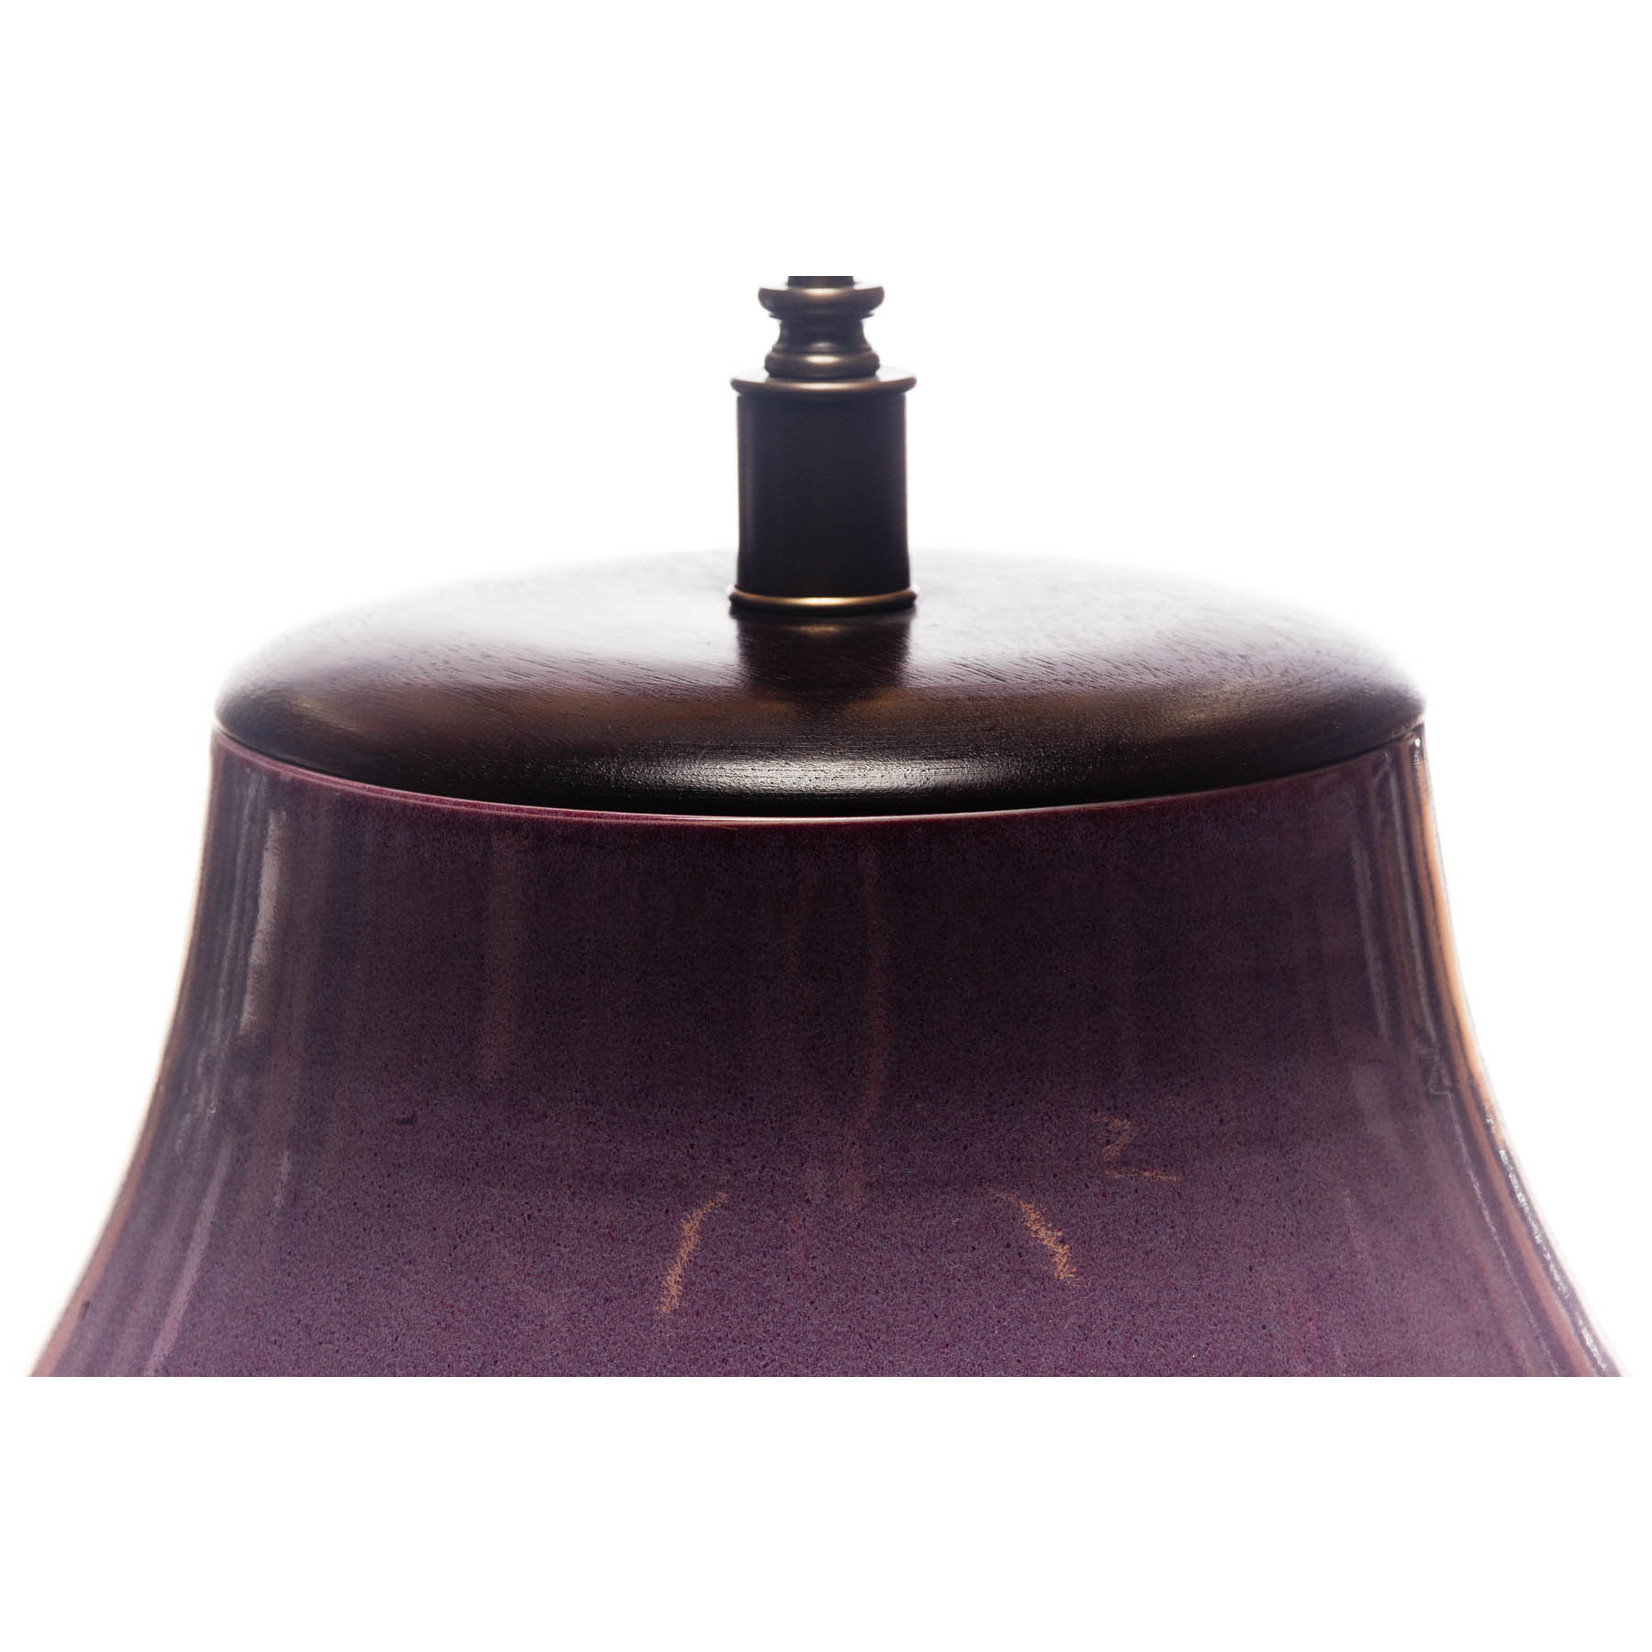 Lawrence & Scott Legacy Lillian Porcelain Table Lamp in Plum with Rosewood Cap (Showroom)